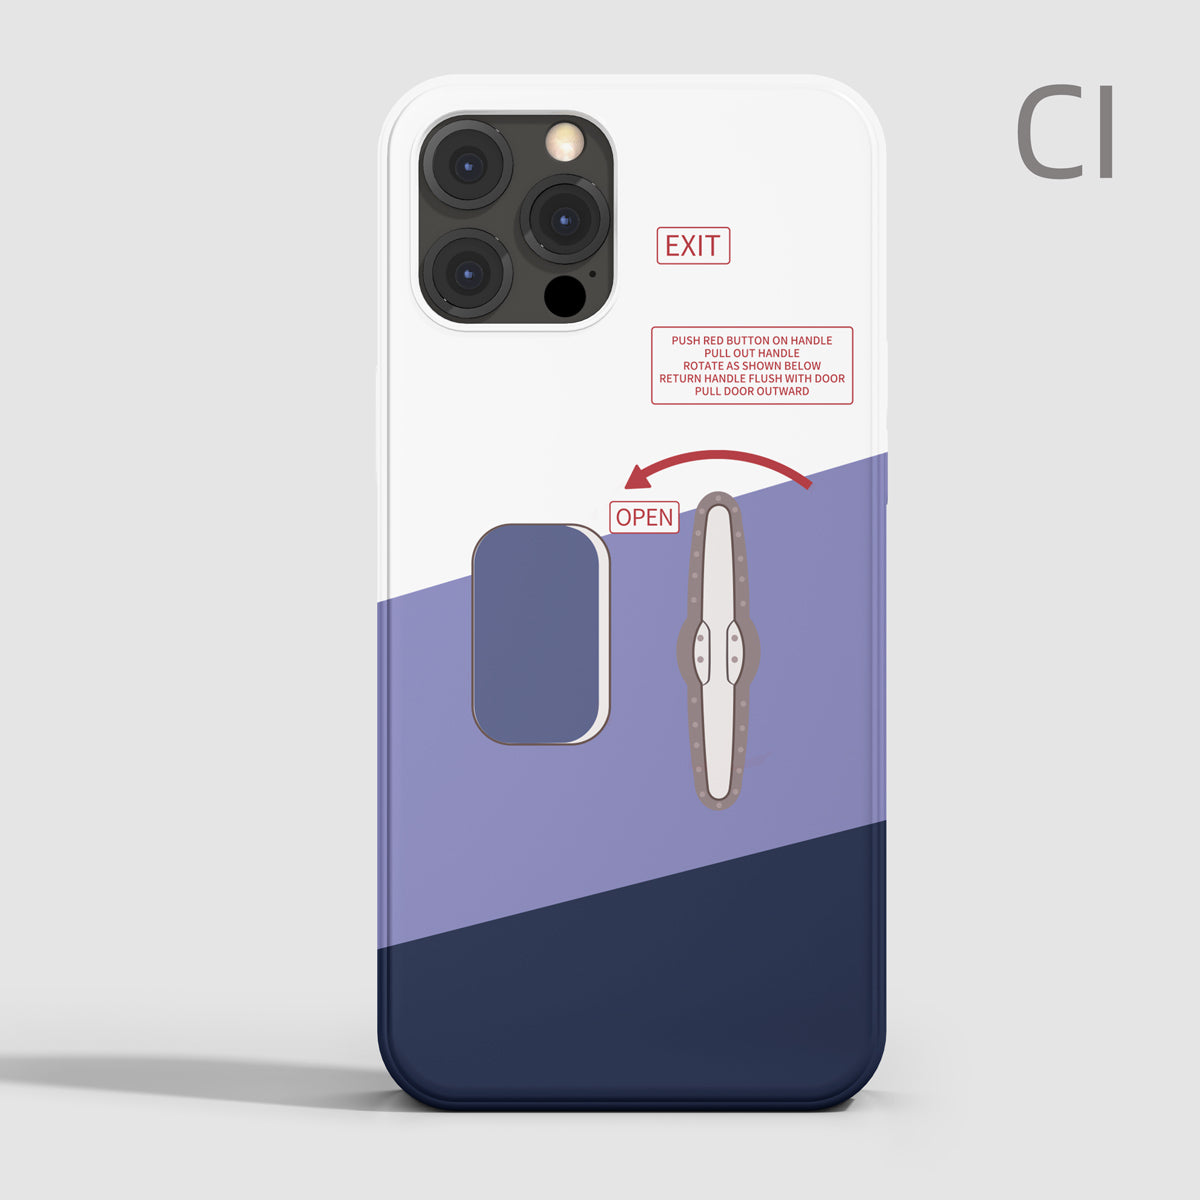 China Airlines CI Boeing 747 Phone Case aviation gift pilot iphone apple samsung xiaomi huawei oneplus redmi